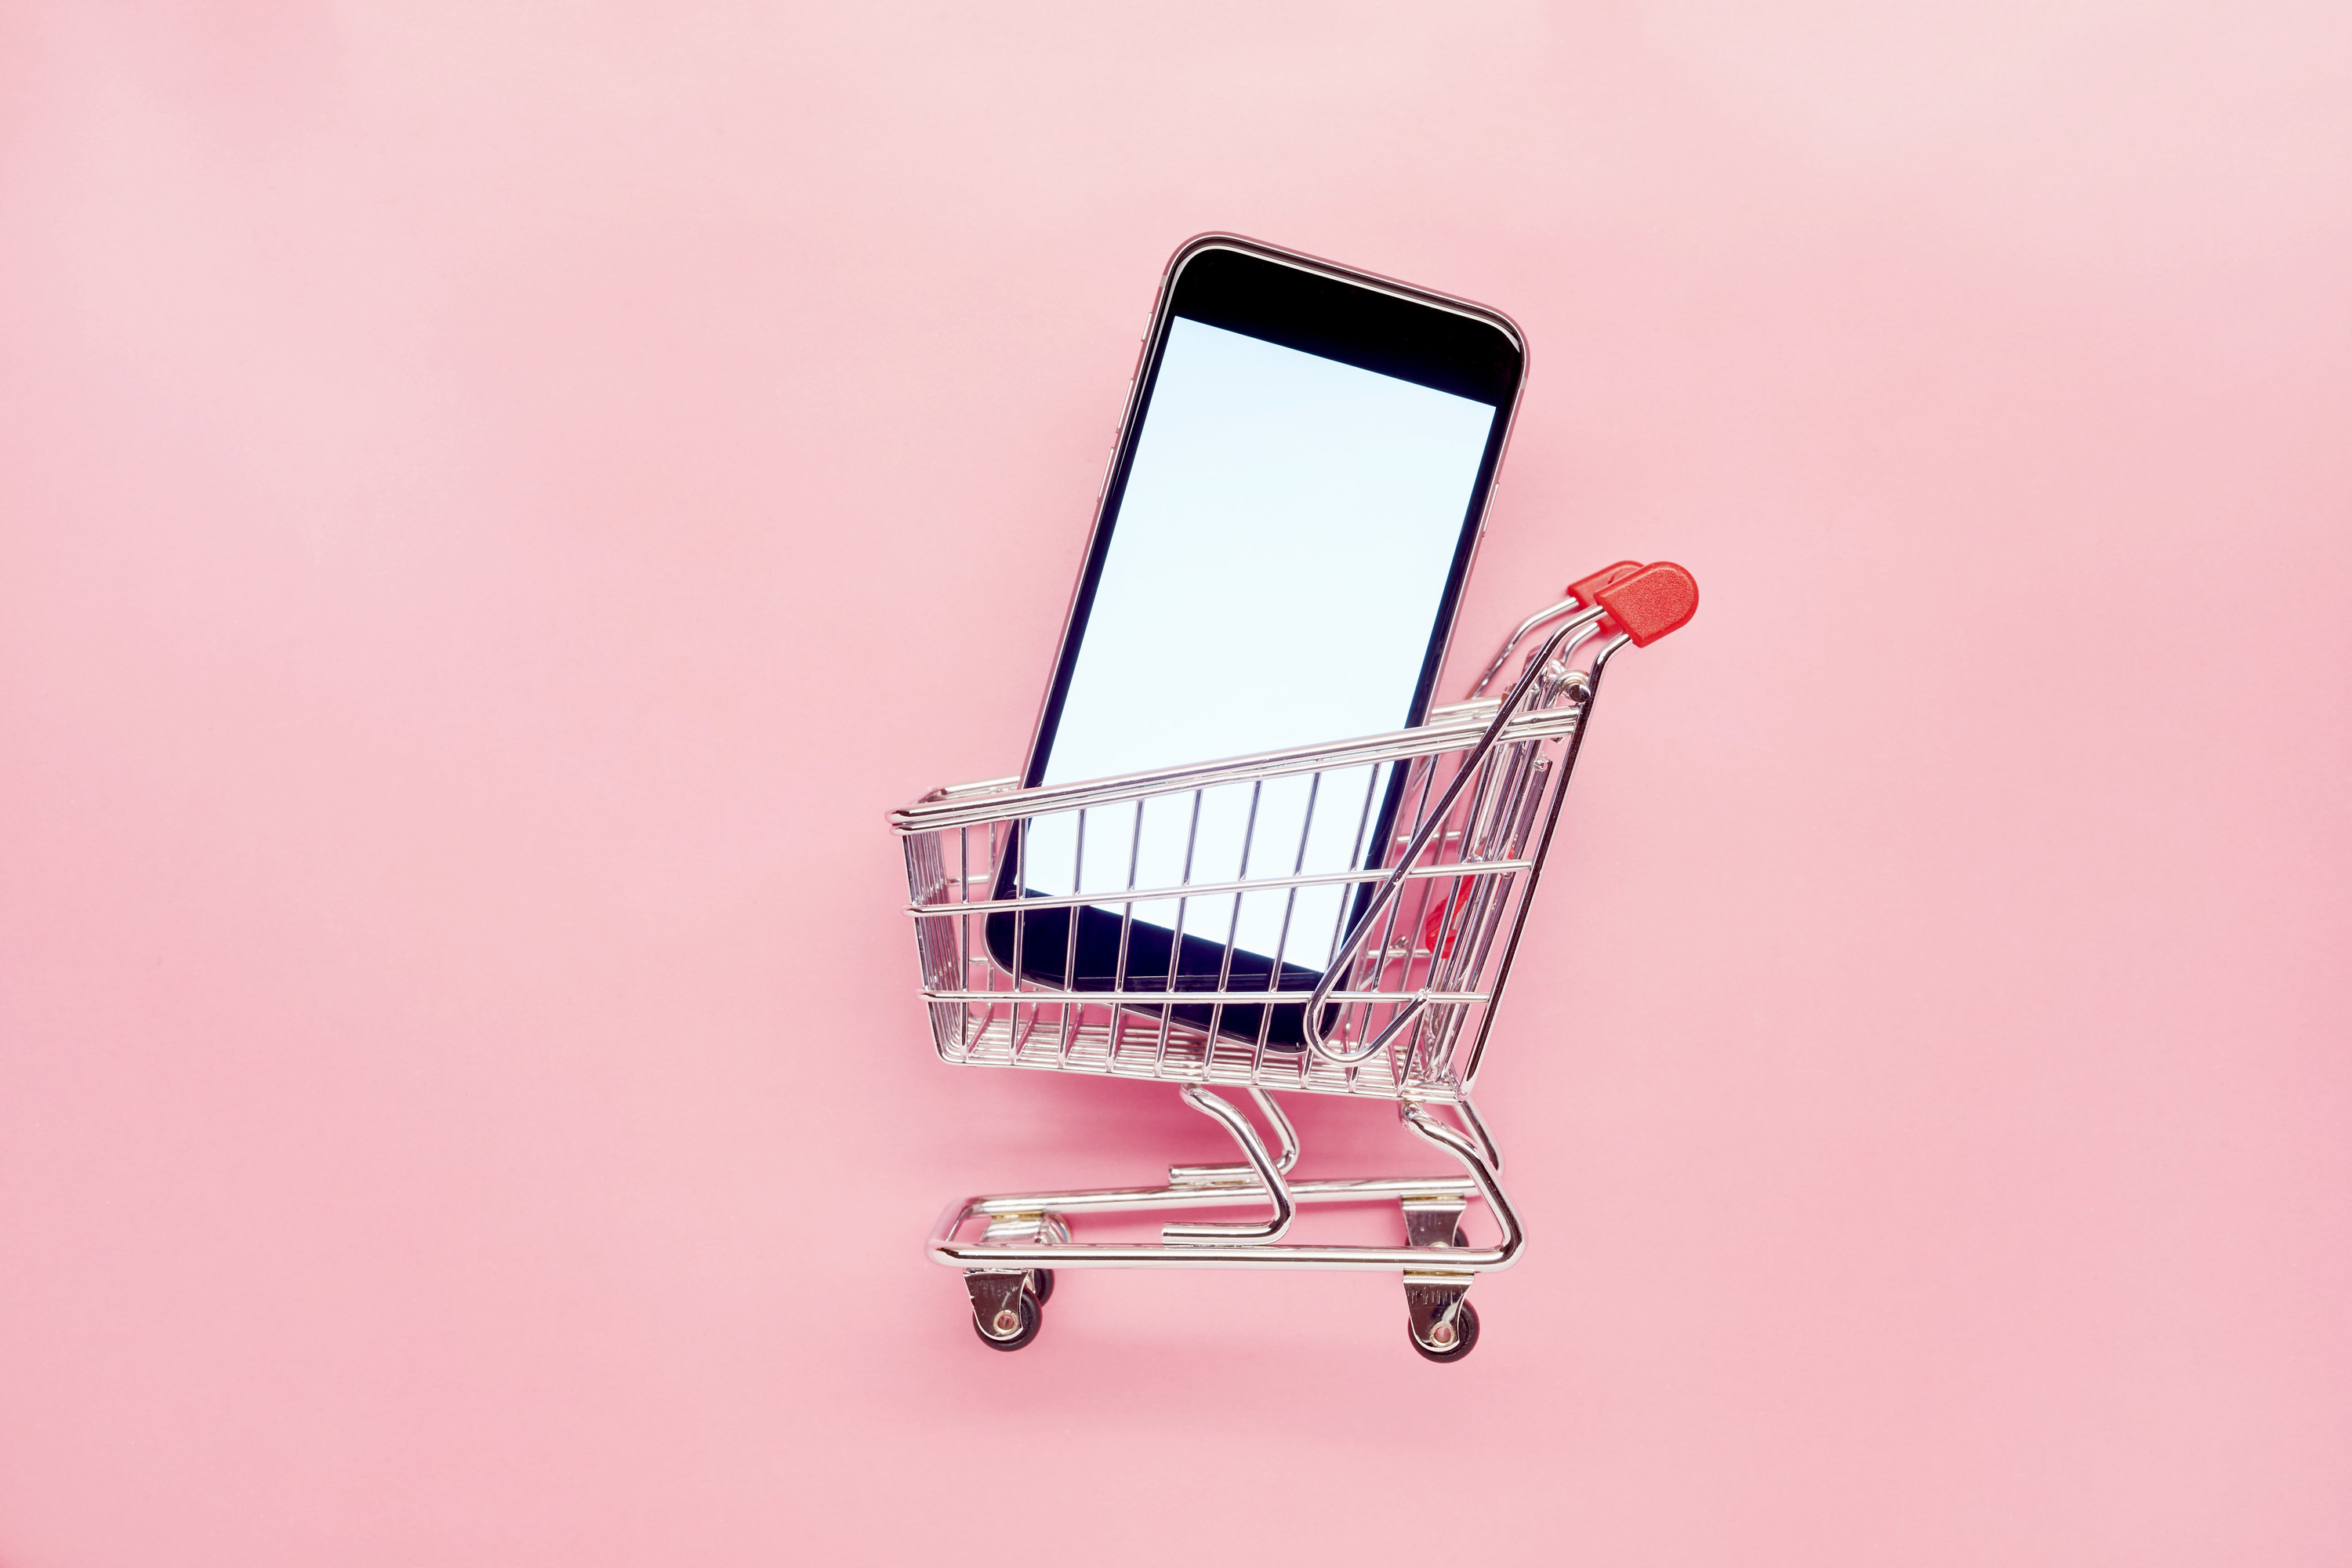 A phone in a small cart